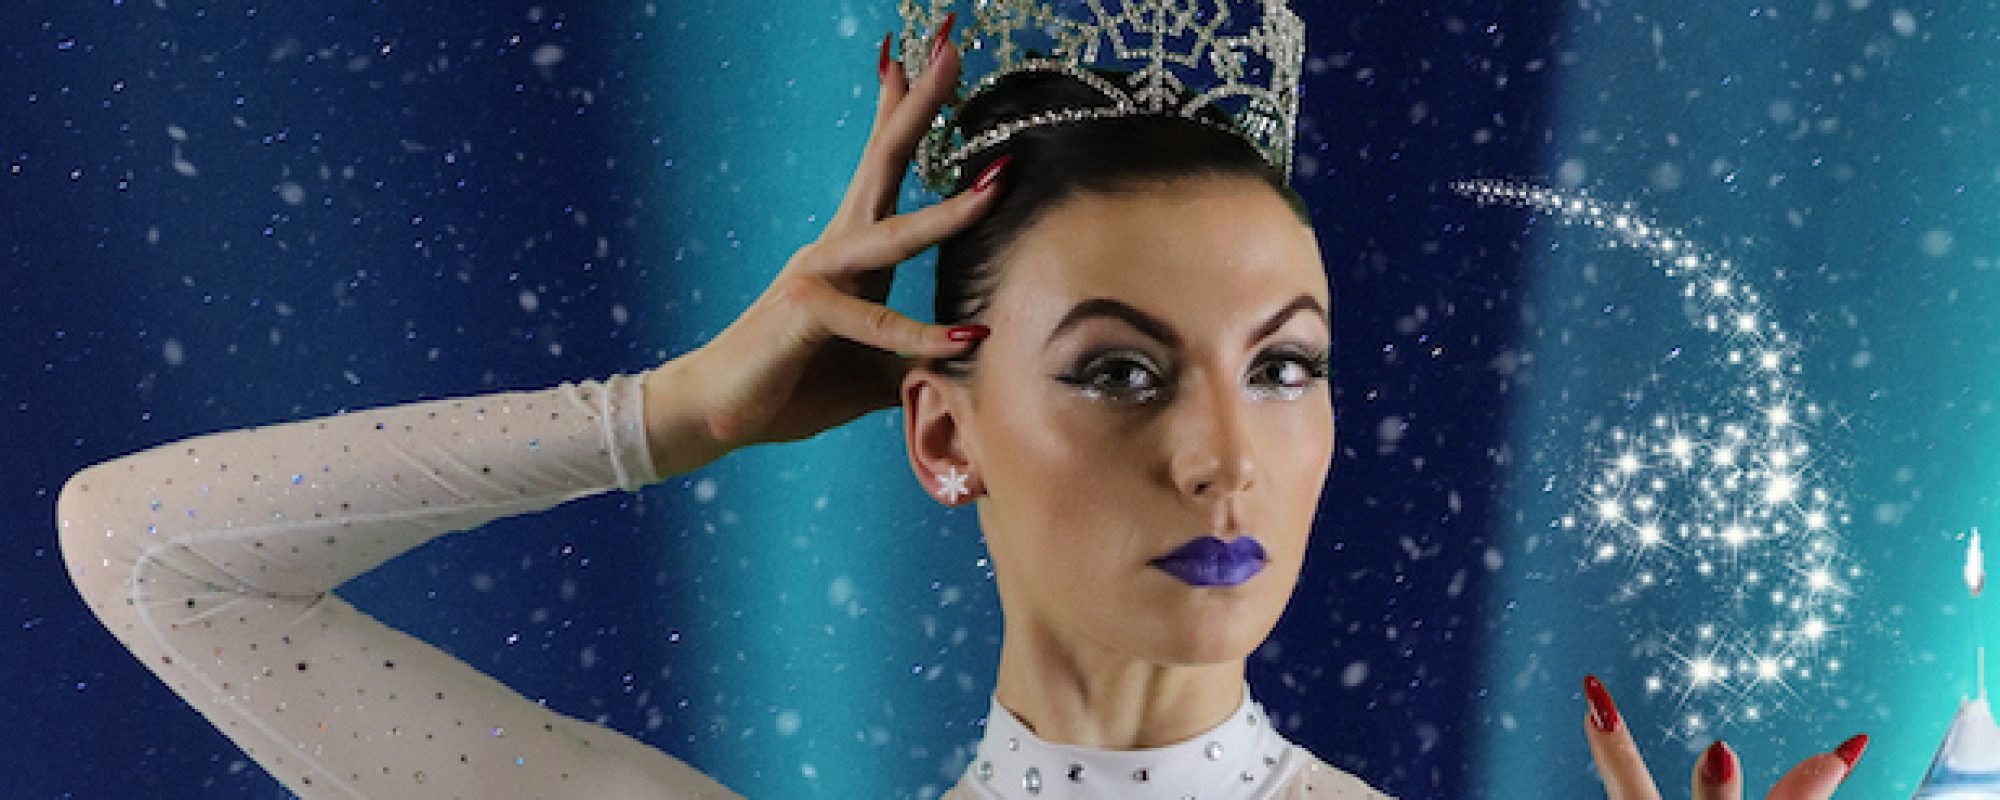 OVATION TV TO BROADCAST REDONDO BALLET’S PRODUCTION OF SNOW QUEEN